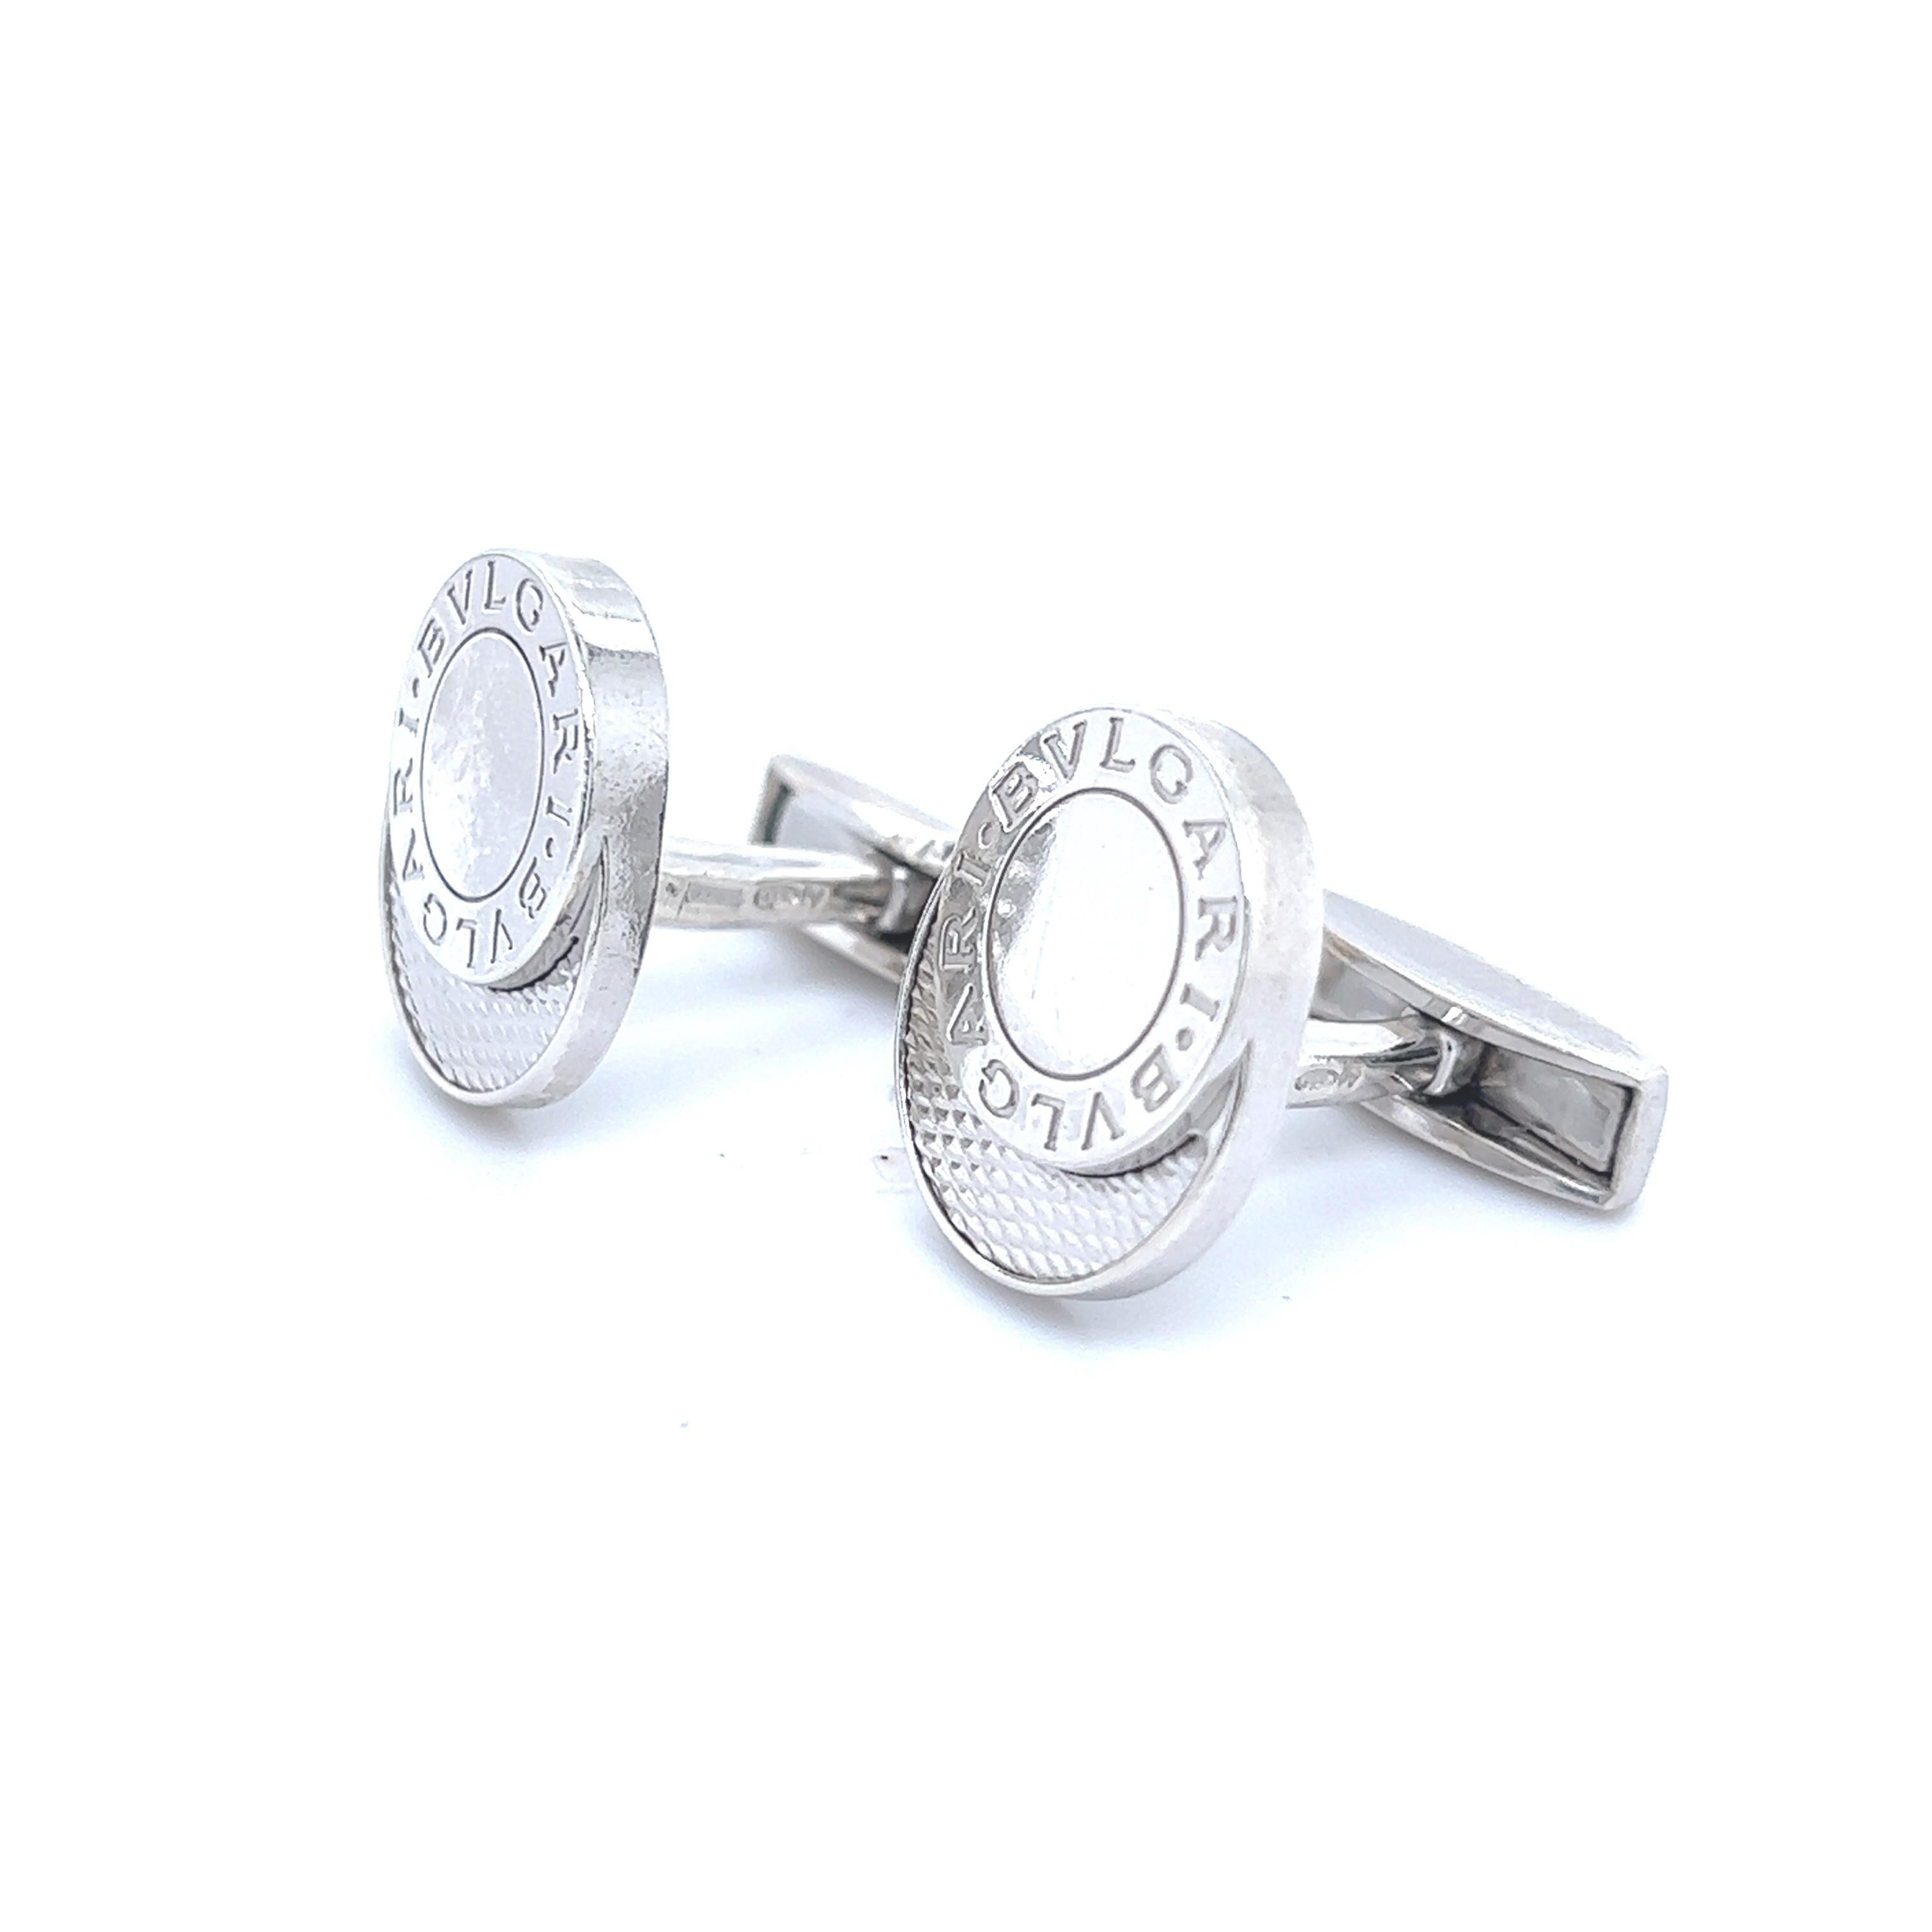 Bulgari Bvlgari Estate Mens Cufflinks Silver B6

TRUSTED SELLER SINCE 2002

PLEASE SEE OUR HUNDREDS OF POSITIVE FEEDBACKS FROM OUR CLIENTS!!

FREE SHIPPING

DETAILS
Material: Sterling Silver
Weight: 8 Grams

These Authentic Bulgari Men's cufflinks